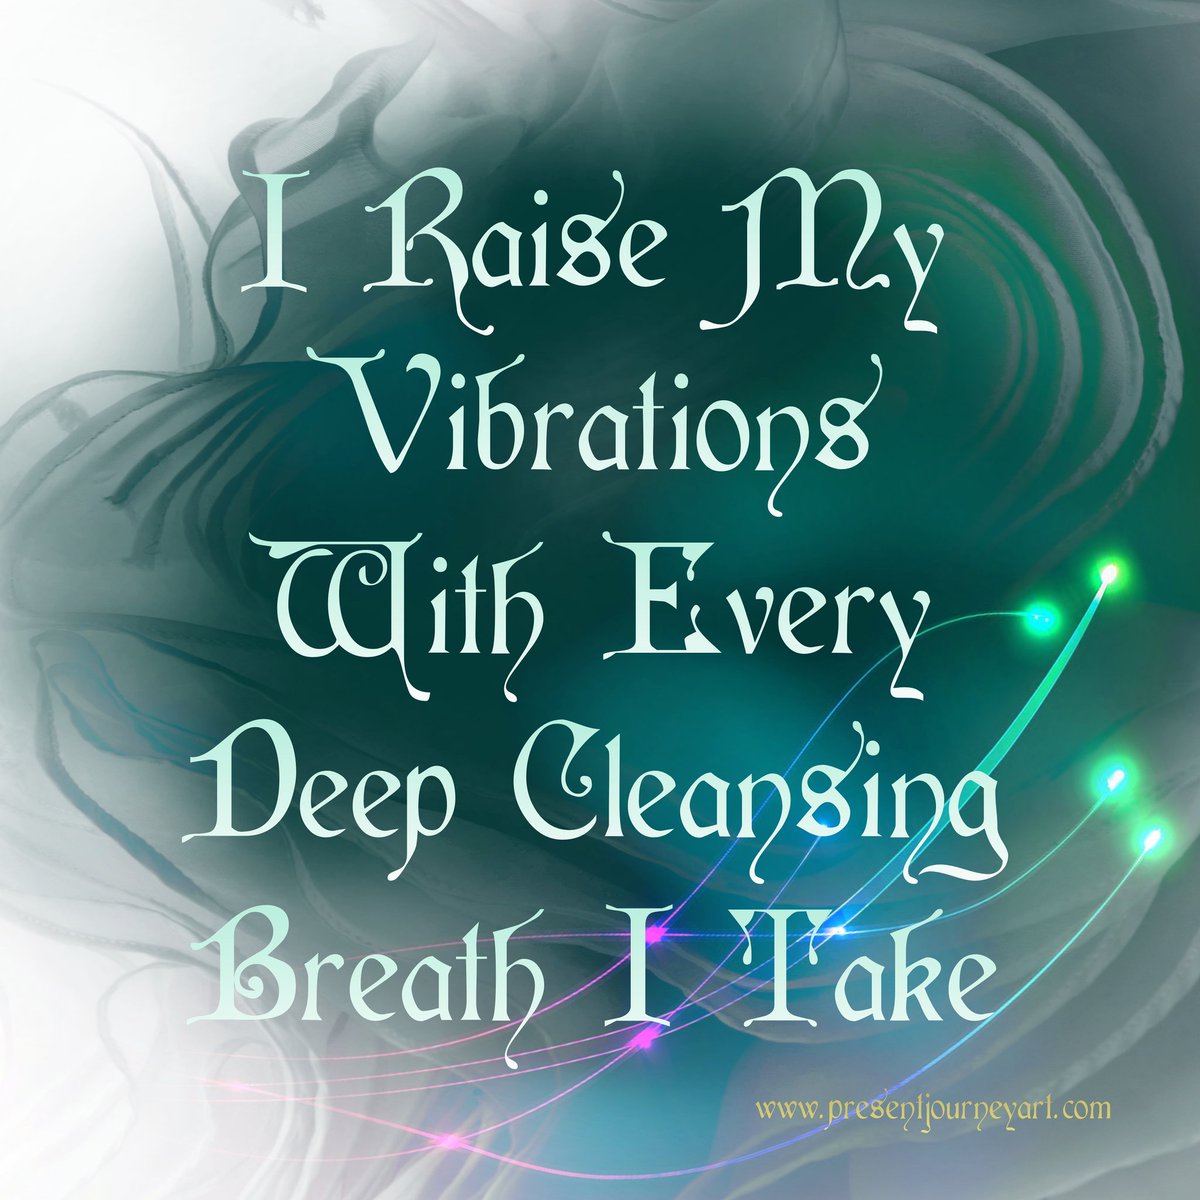 Good Morning everyone. Sending love to you all.
When you wake up and before you go to bed
Before you put the mask on to take some deep cleansing breaths
Do this as often as possible
 ☮💜🧜‍♀️ #WednesdayMotivation 
#breathe #MaskUp #MaskTips #raiseyourvibe